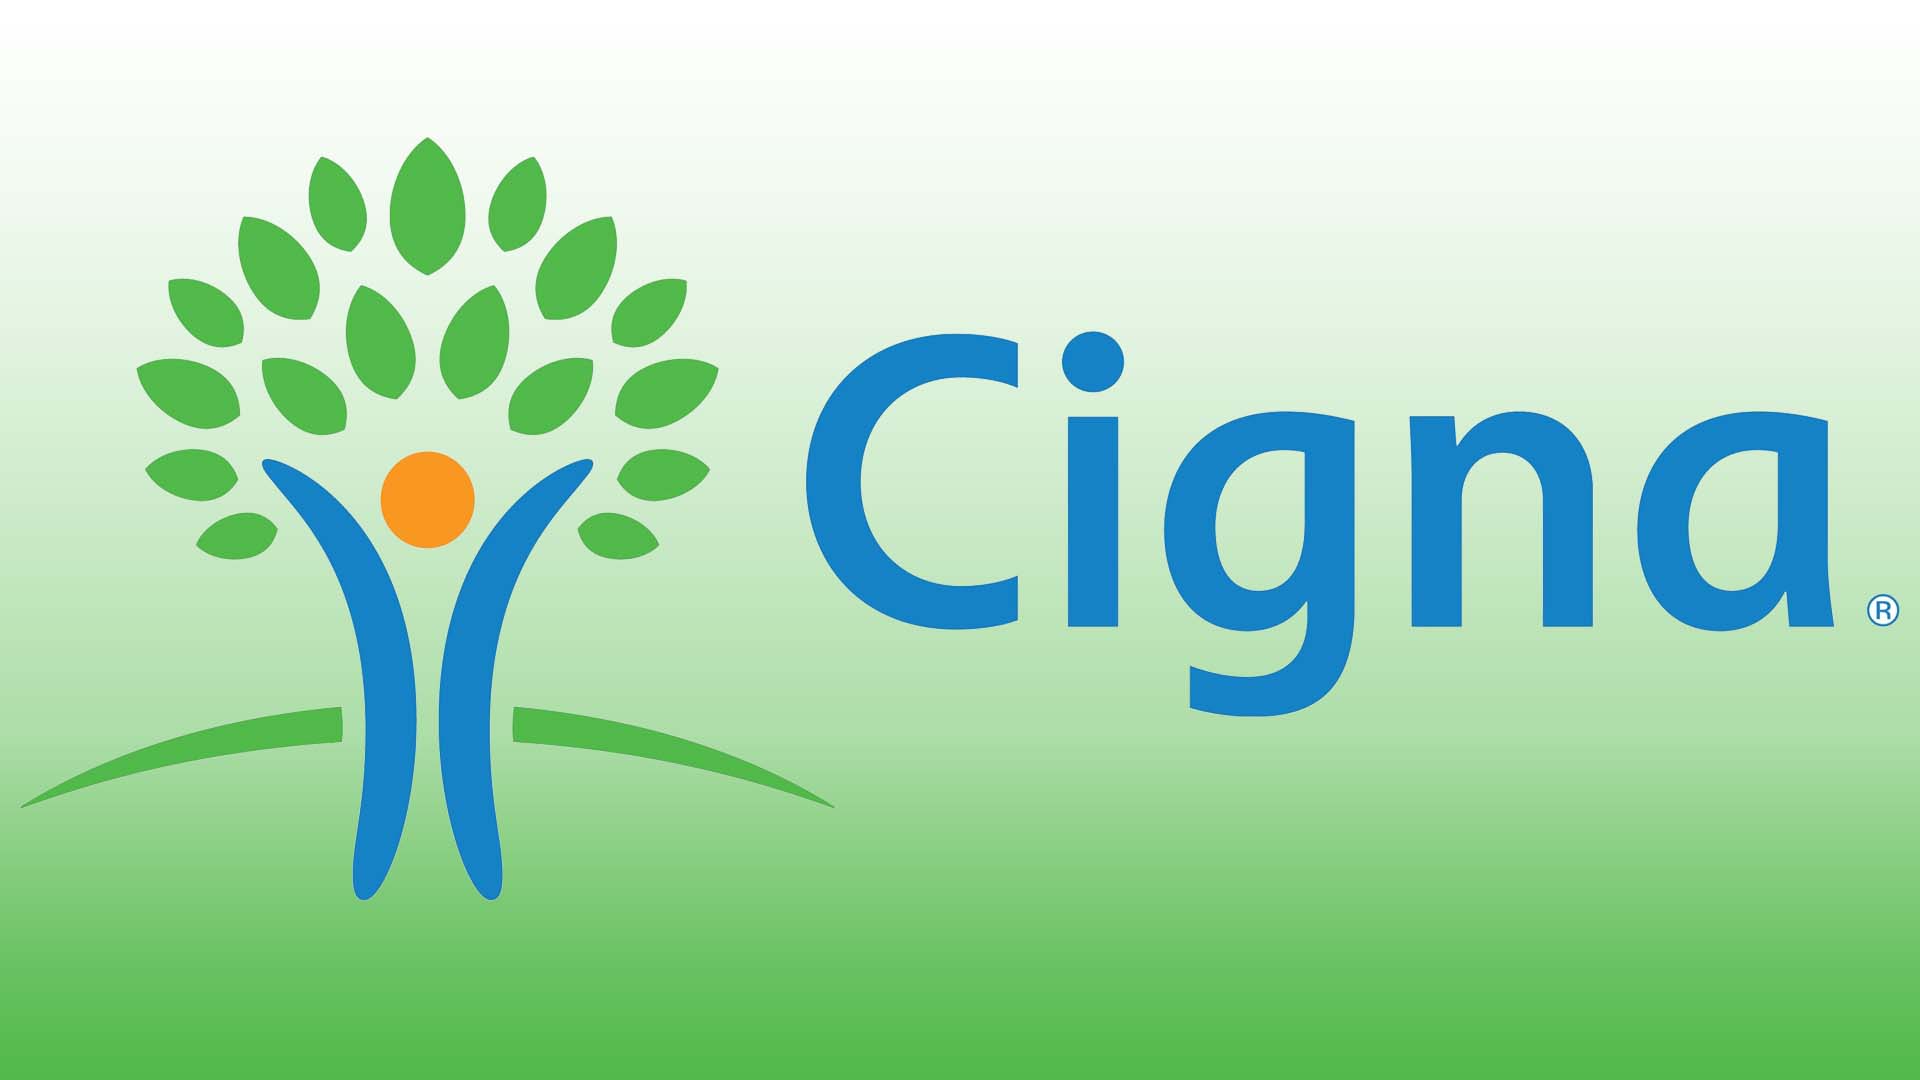 Cigna logo which is a Medicare Supplement Insurance company